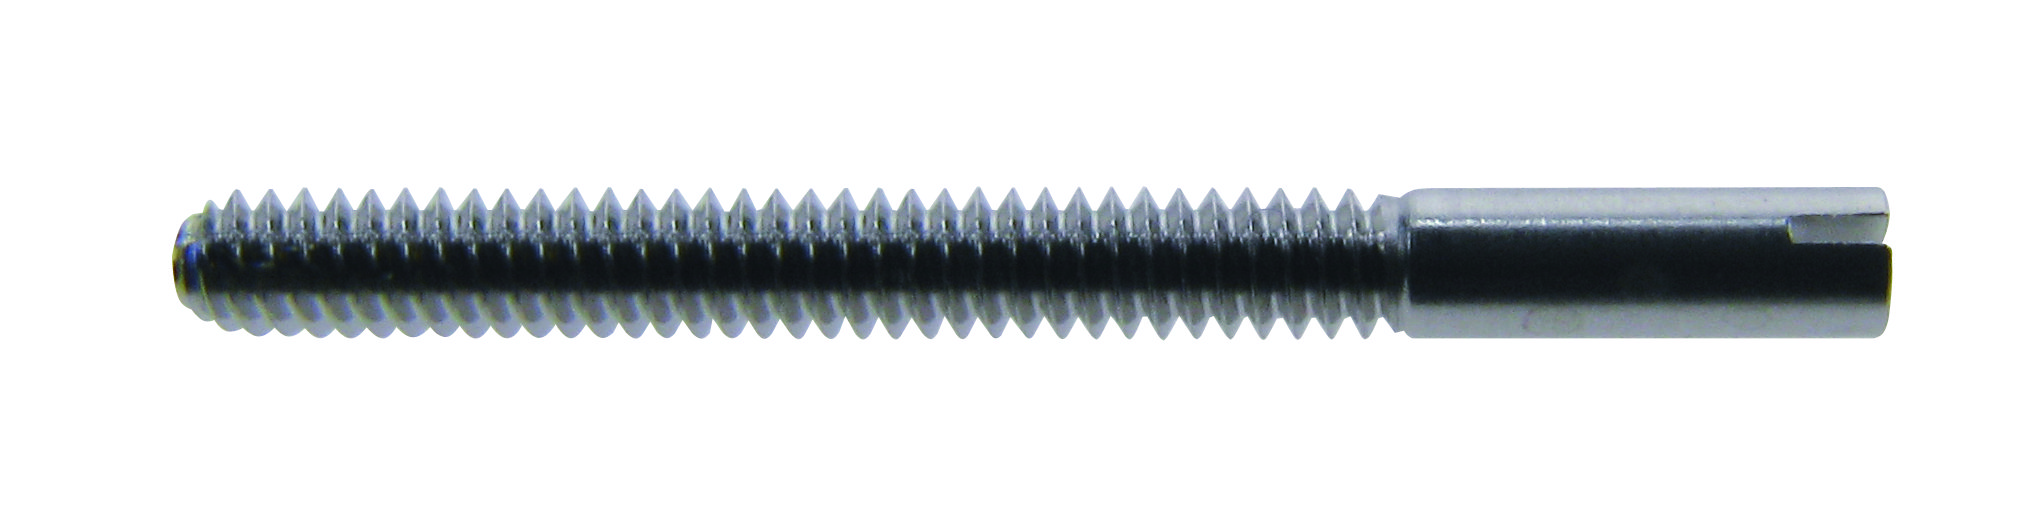 Band screw, stainless steel, length 15.00-1.20mm, dia. 0.90mm, contents 5 pcs.